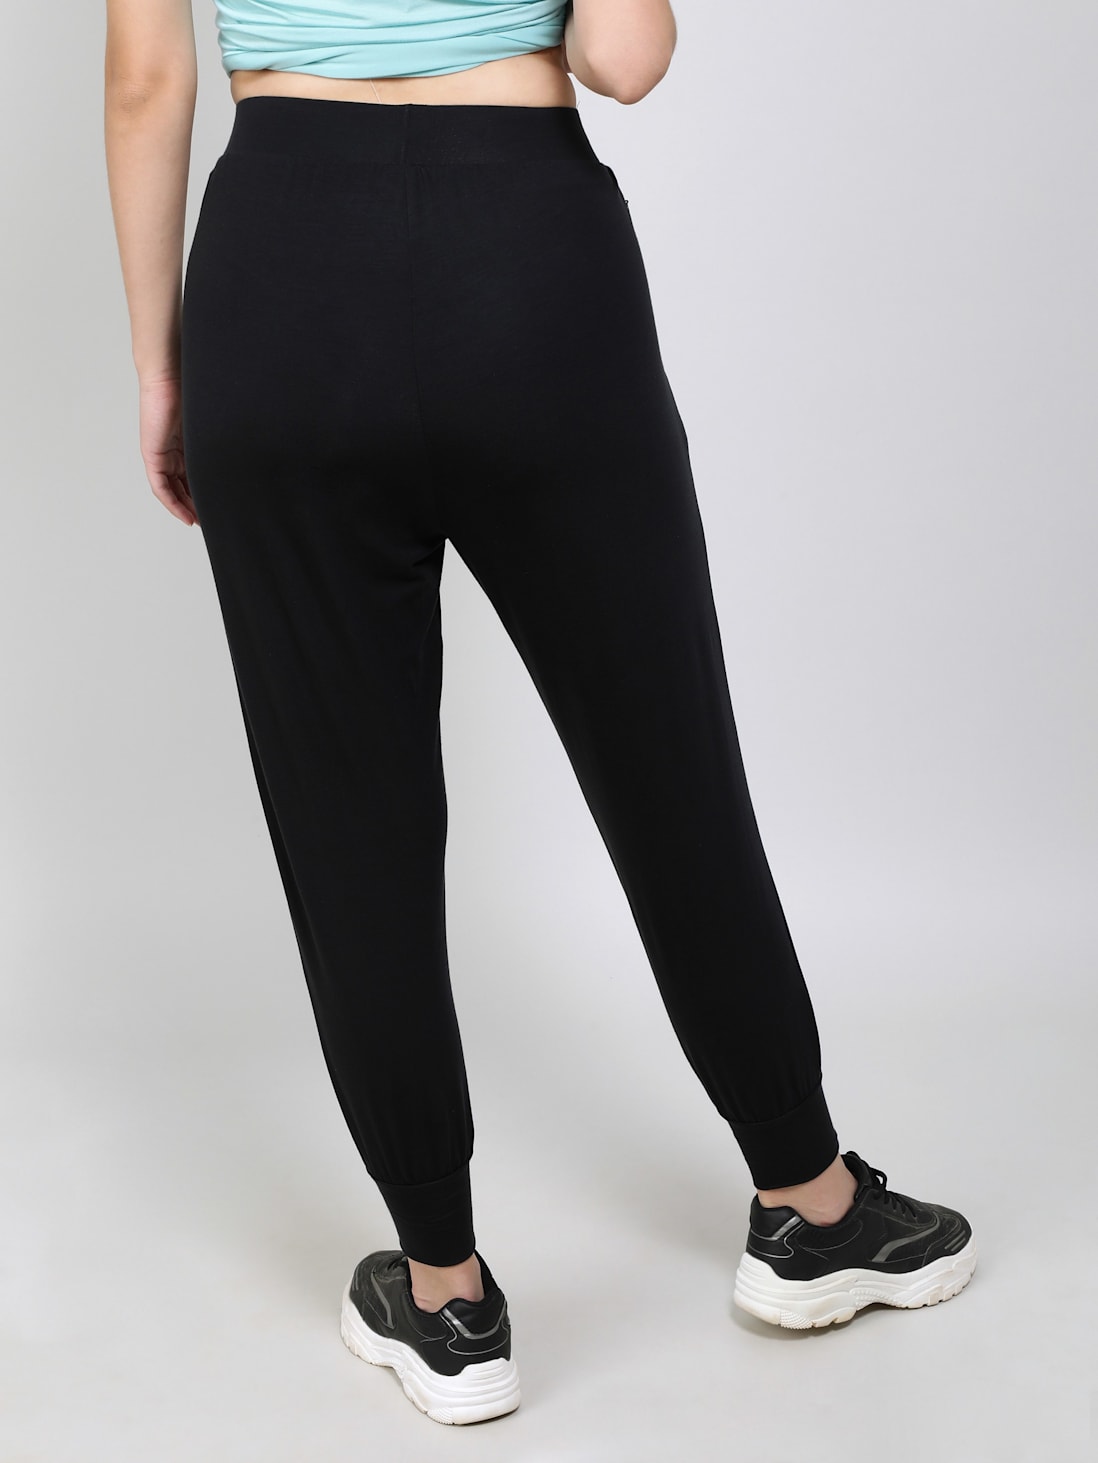 Jockey half zip and leggings with adidas sneakers for an athleisure outfit